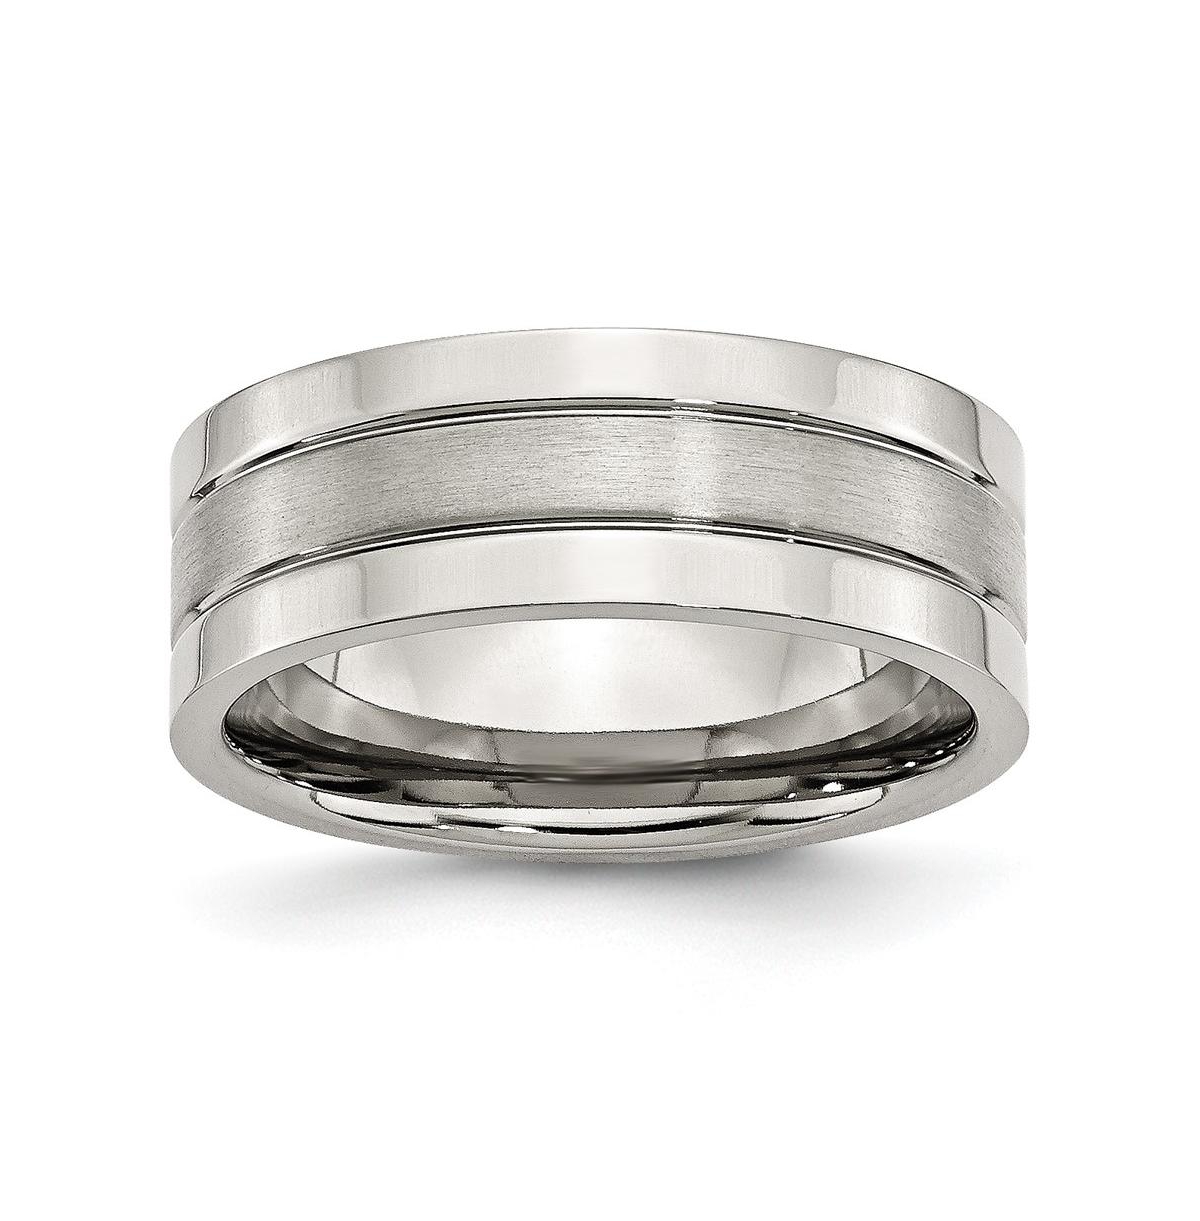 Stainless Steel Polished Satin Center 8mm Grooved Band Ring - Silver